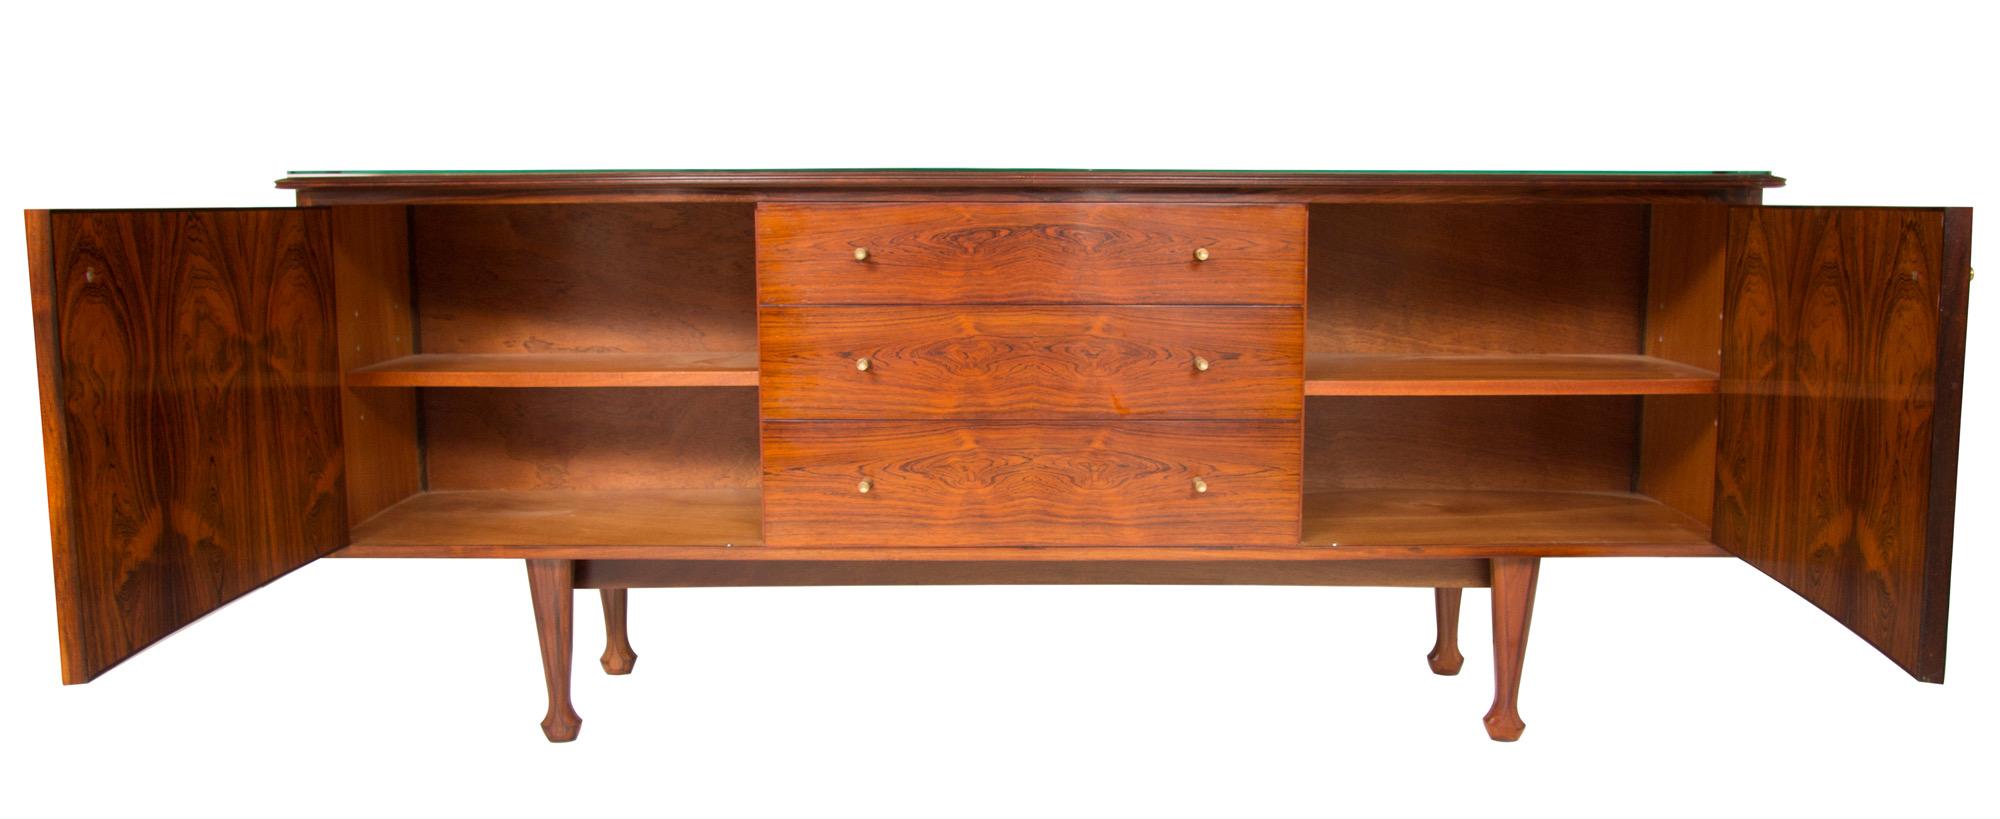 Rosewood Midcentury Bow Front Sideboard by Andrew J Milne For Sale